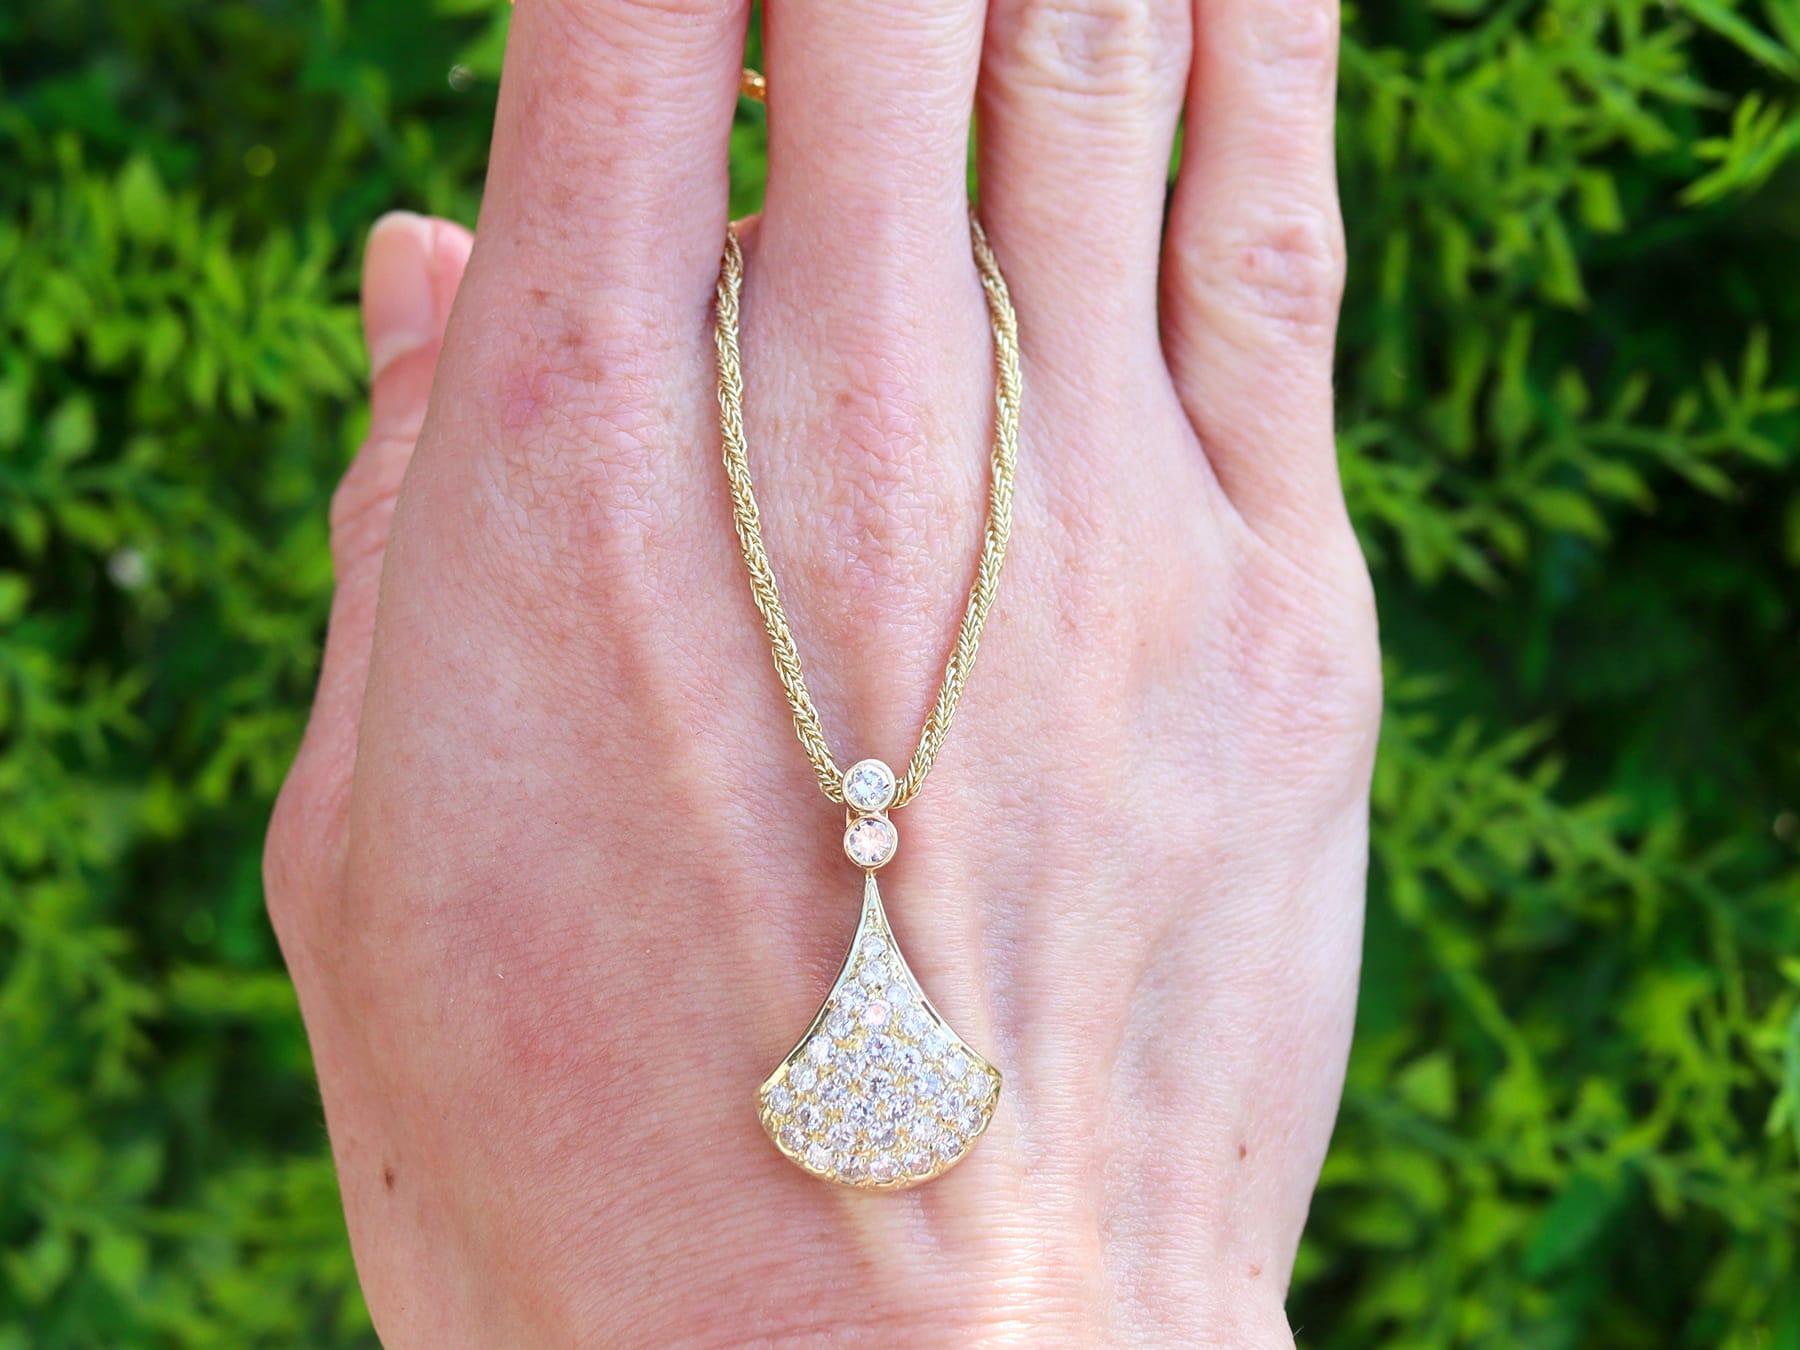 A stunning, fine and impressive vintage 0.85 carat multi diamond and 14 karat yellow gold pendant; part of our diverse vintage jewelry collections.

This stunning, fine and impressive diamond pendant has been crafted in 14k yellow gold.

The domed,